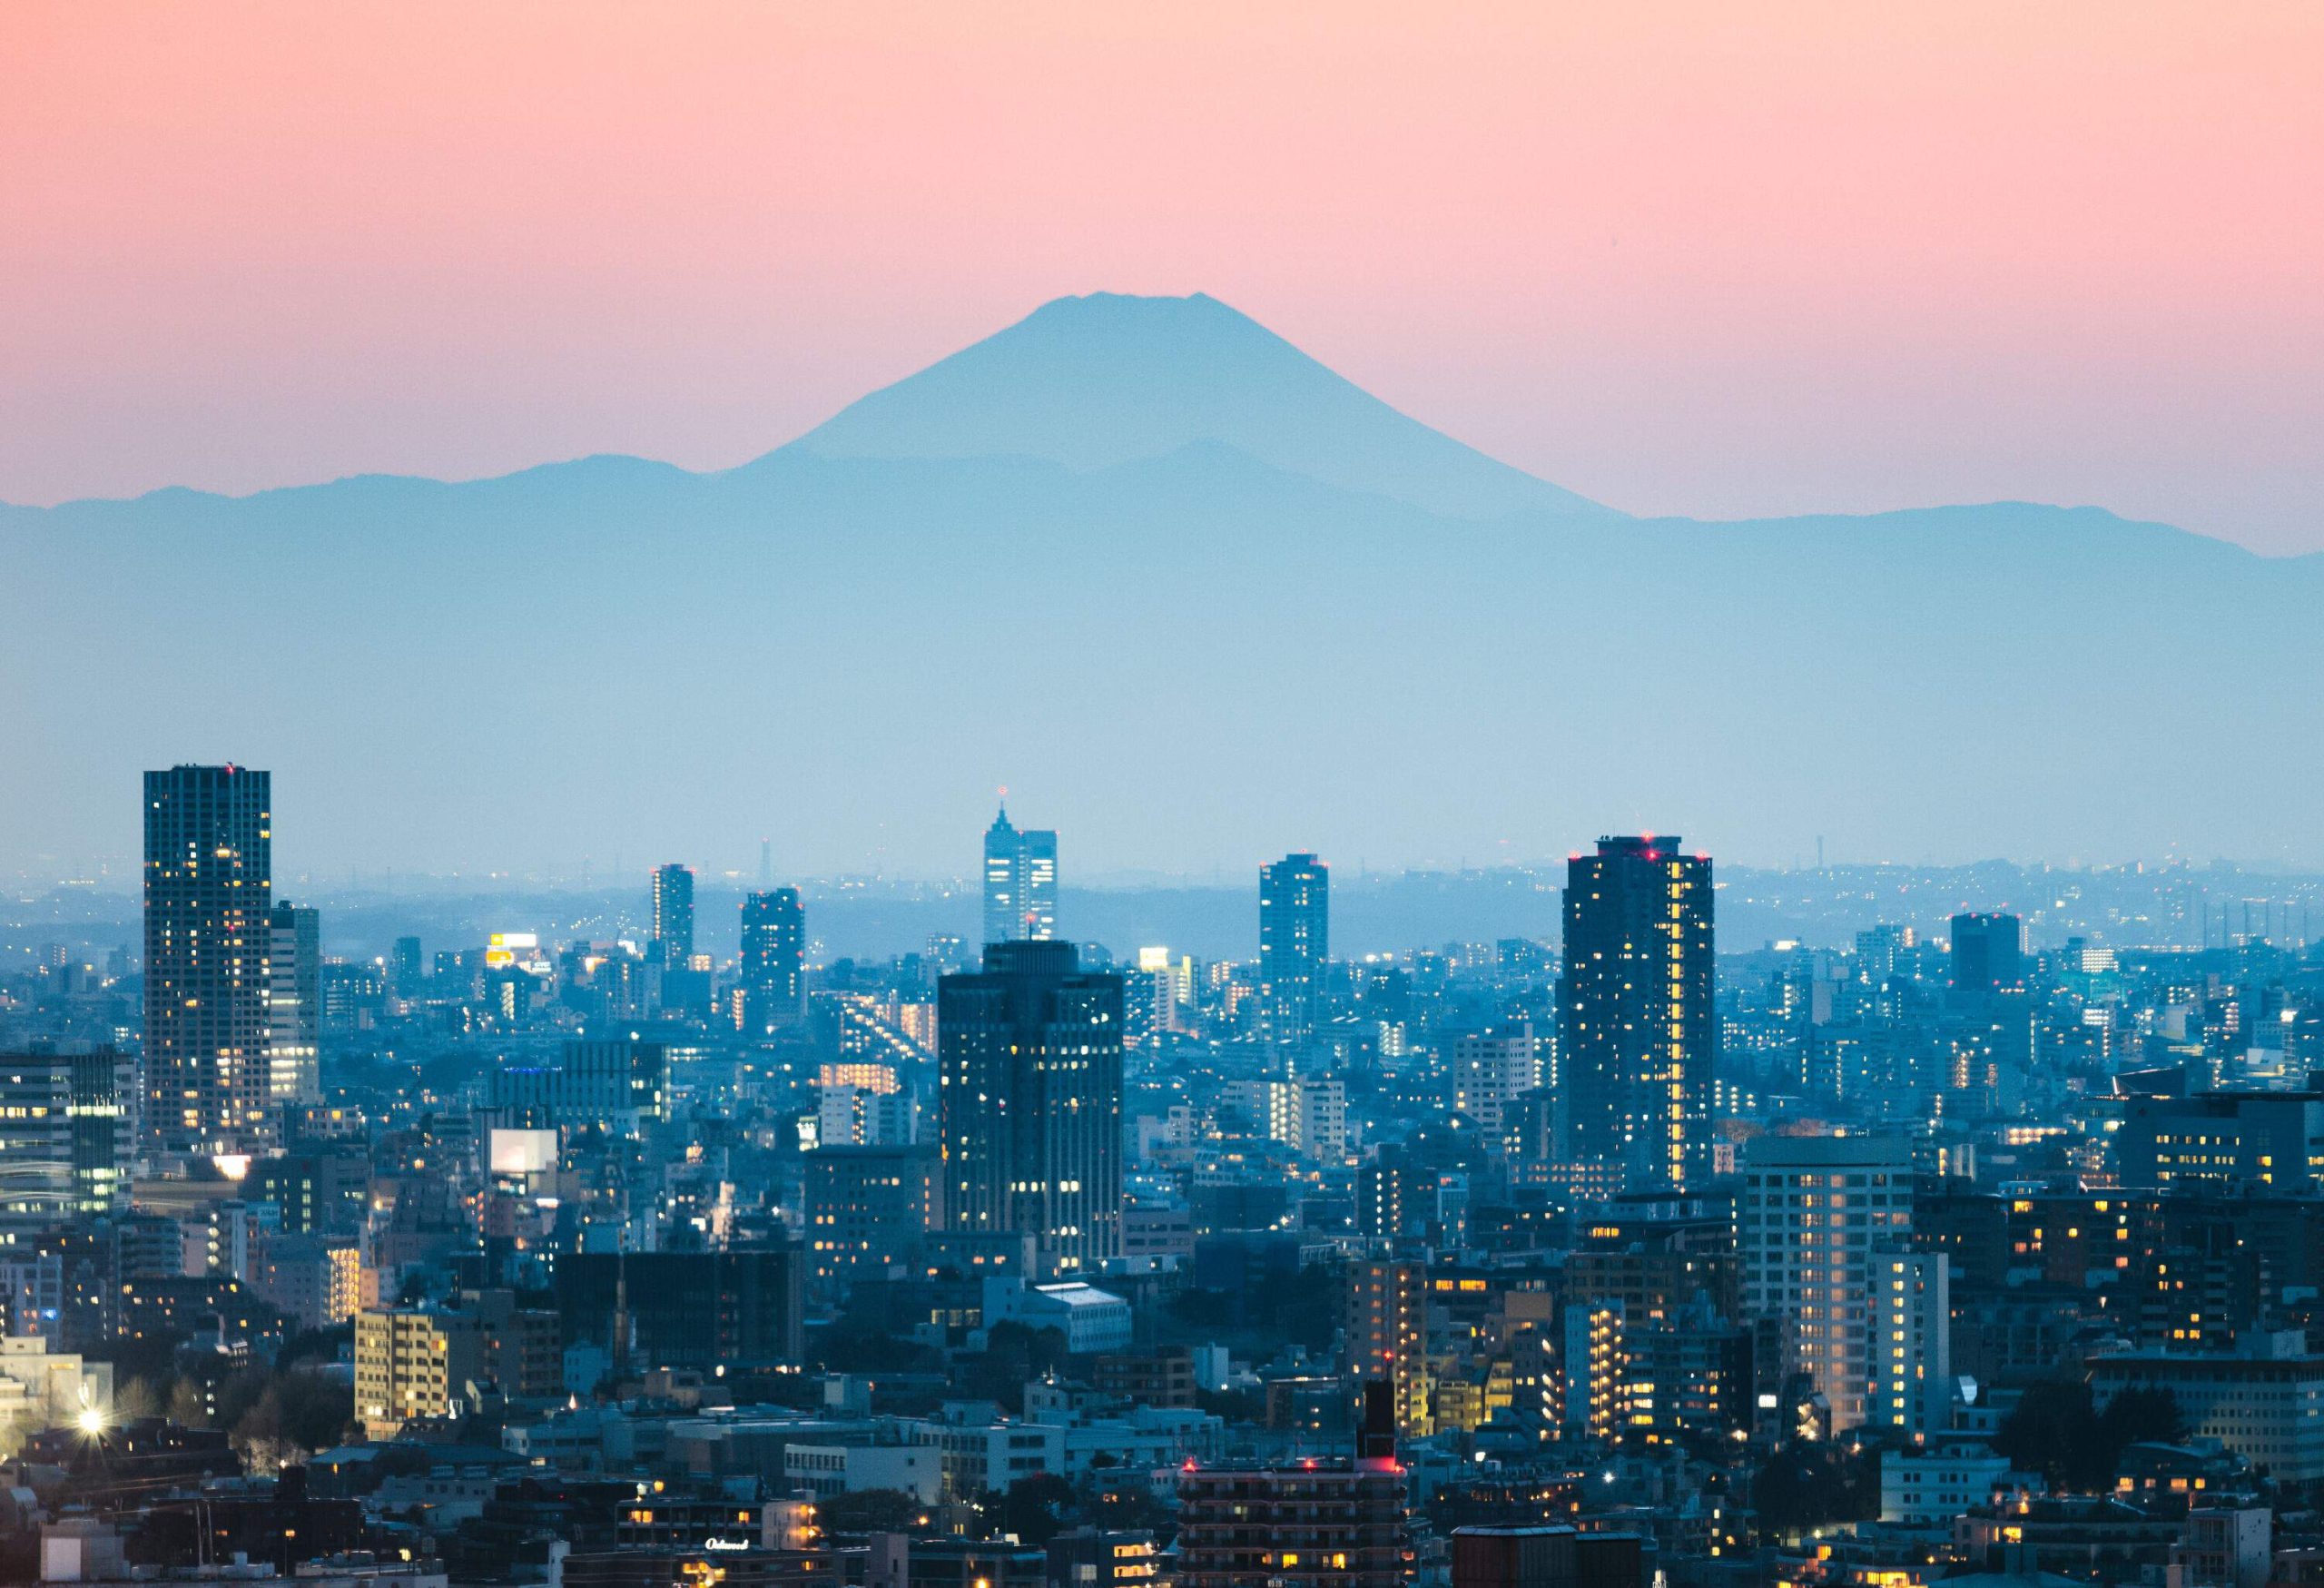 The iconic Mount Fuji is in the backdrop against the lit cityscape.